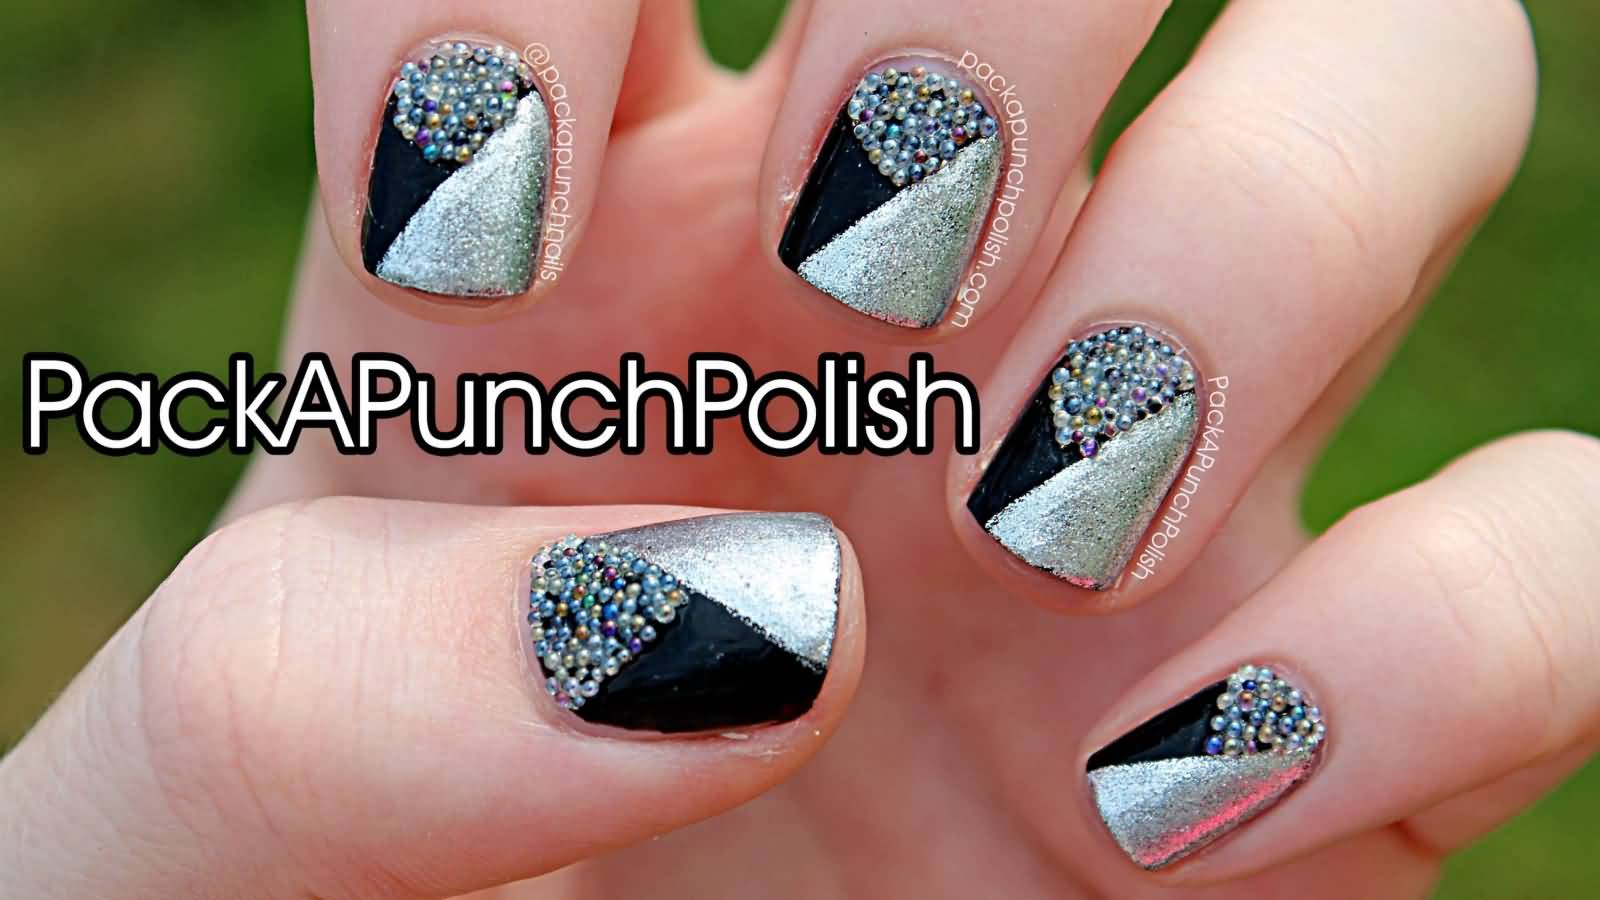 Black And Silver Pattern Nails With Caviar Nail Art